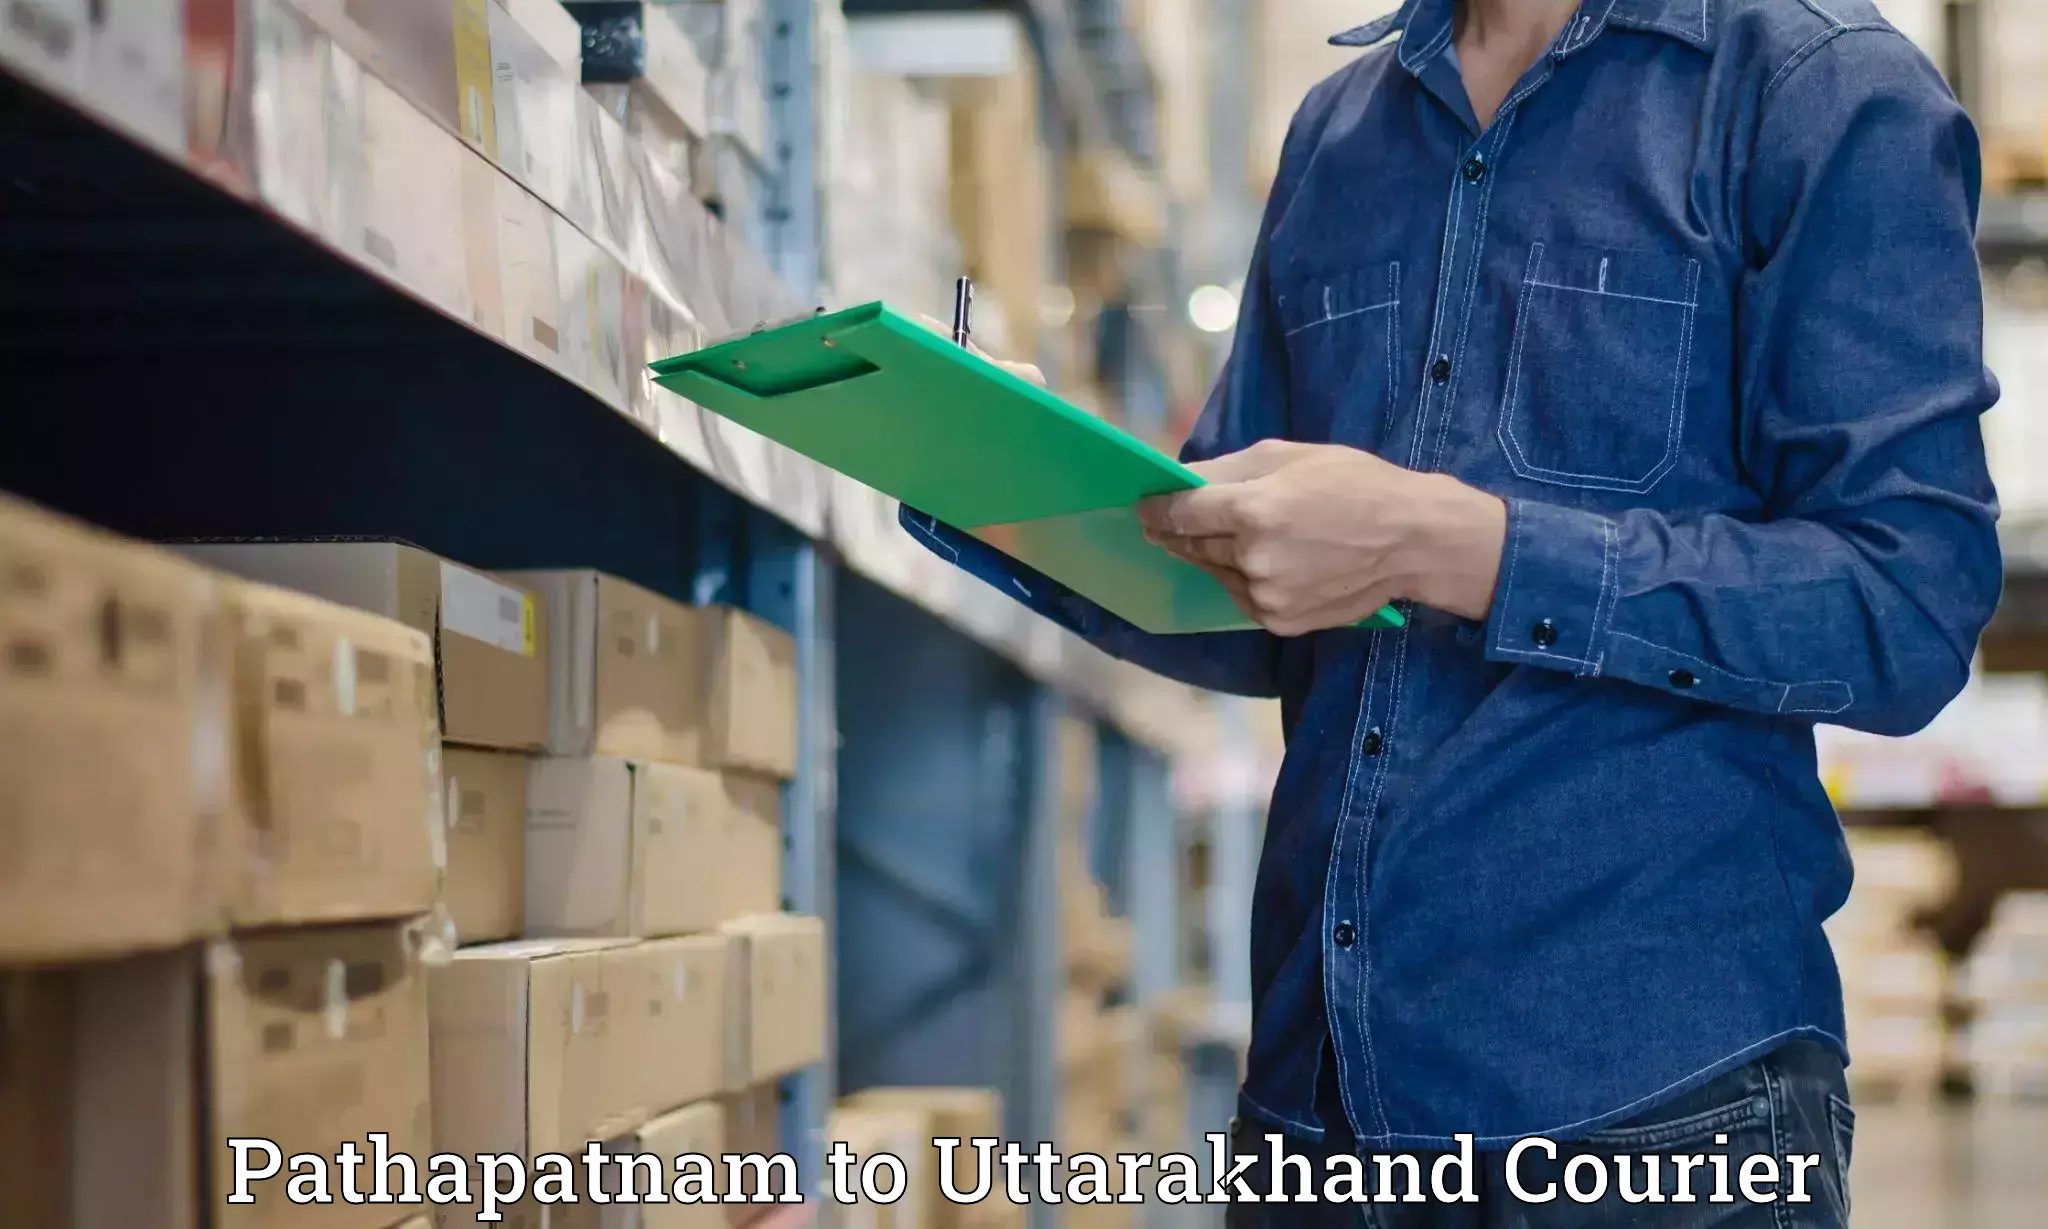 Courier tracking online in Pathapatnam to Uttarakhand